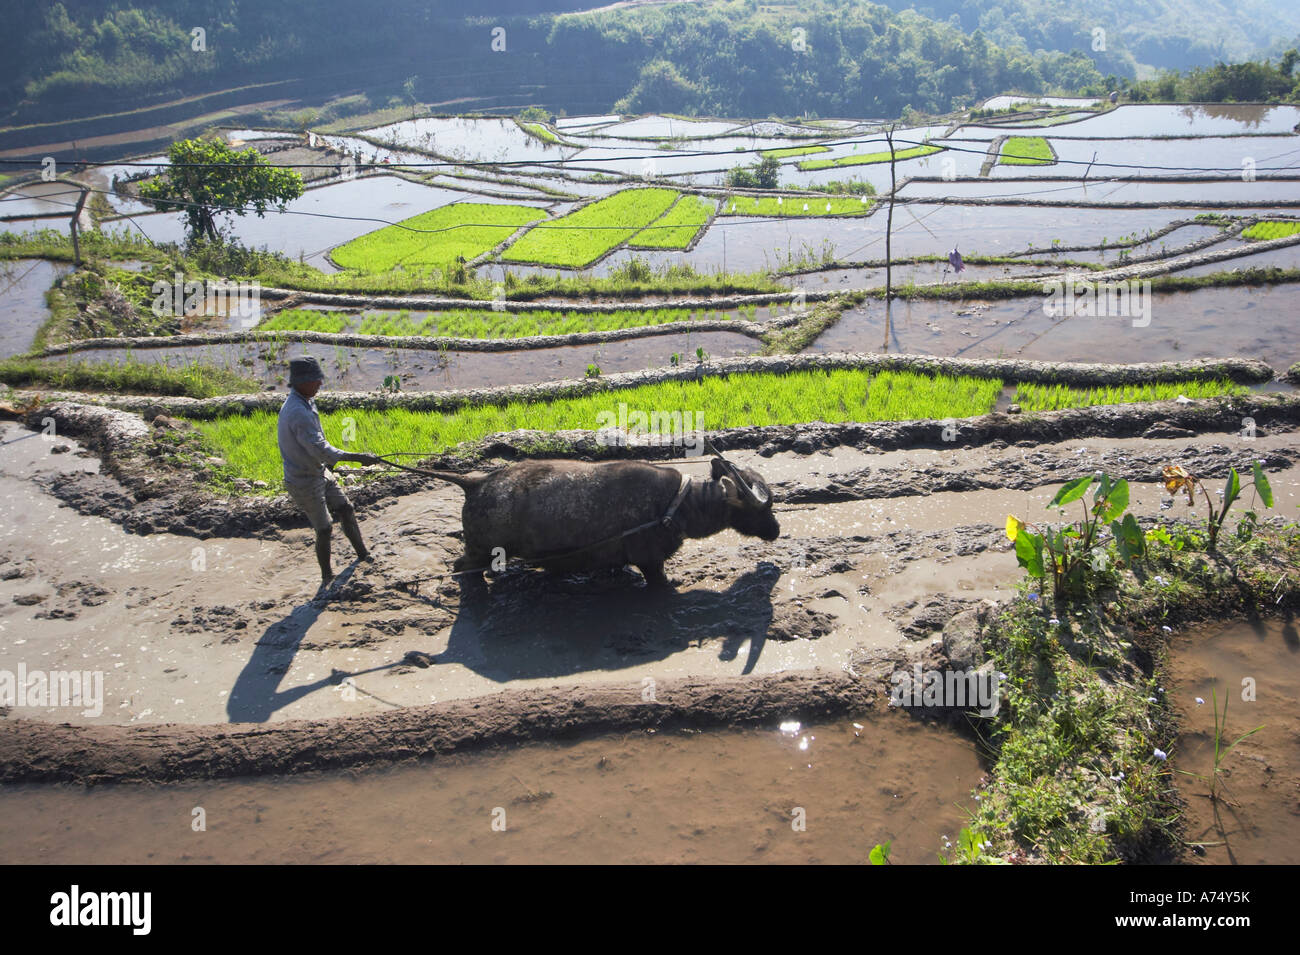 Man Using Ox To Plough Rice Terrace Stock Photo